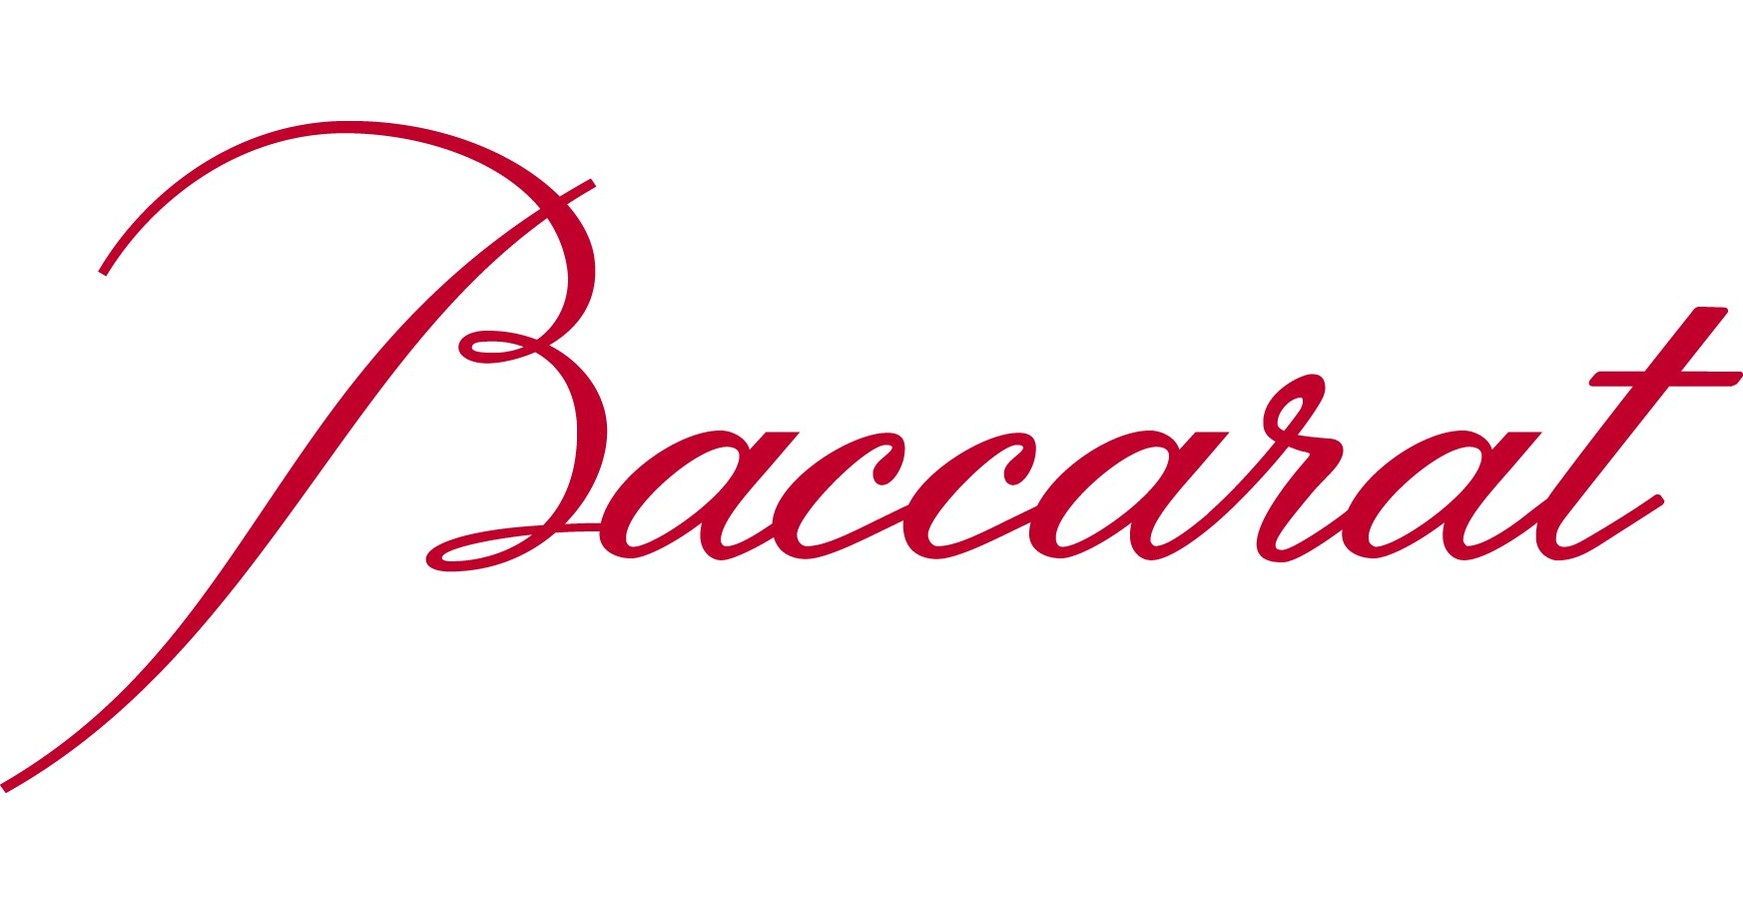 Unveiling the Palladian Tree by Baccarat at Neiman Marcus Downtown